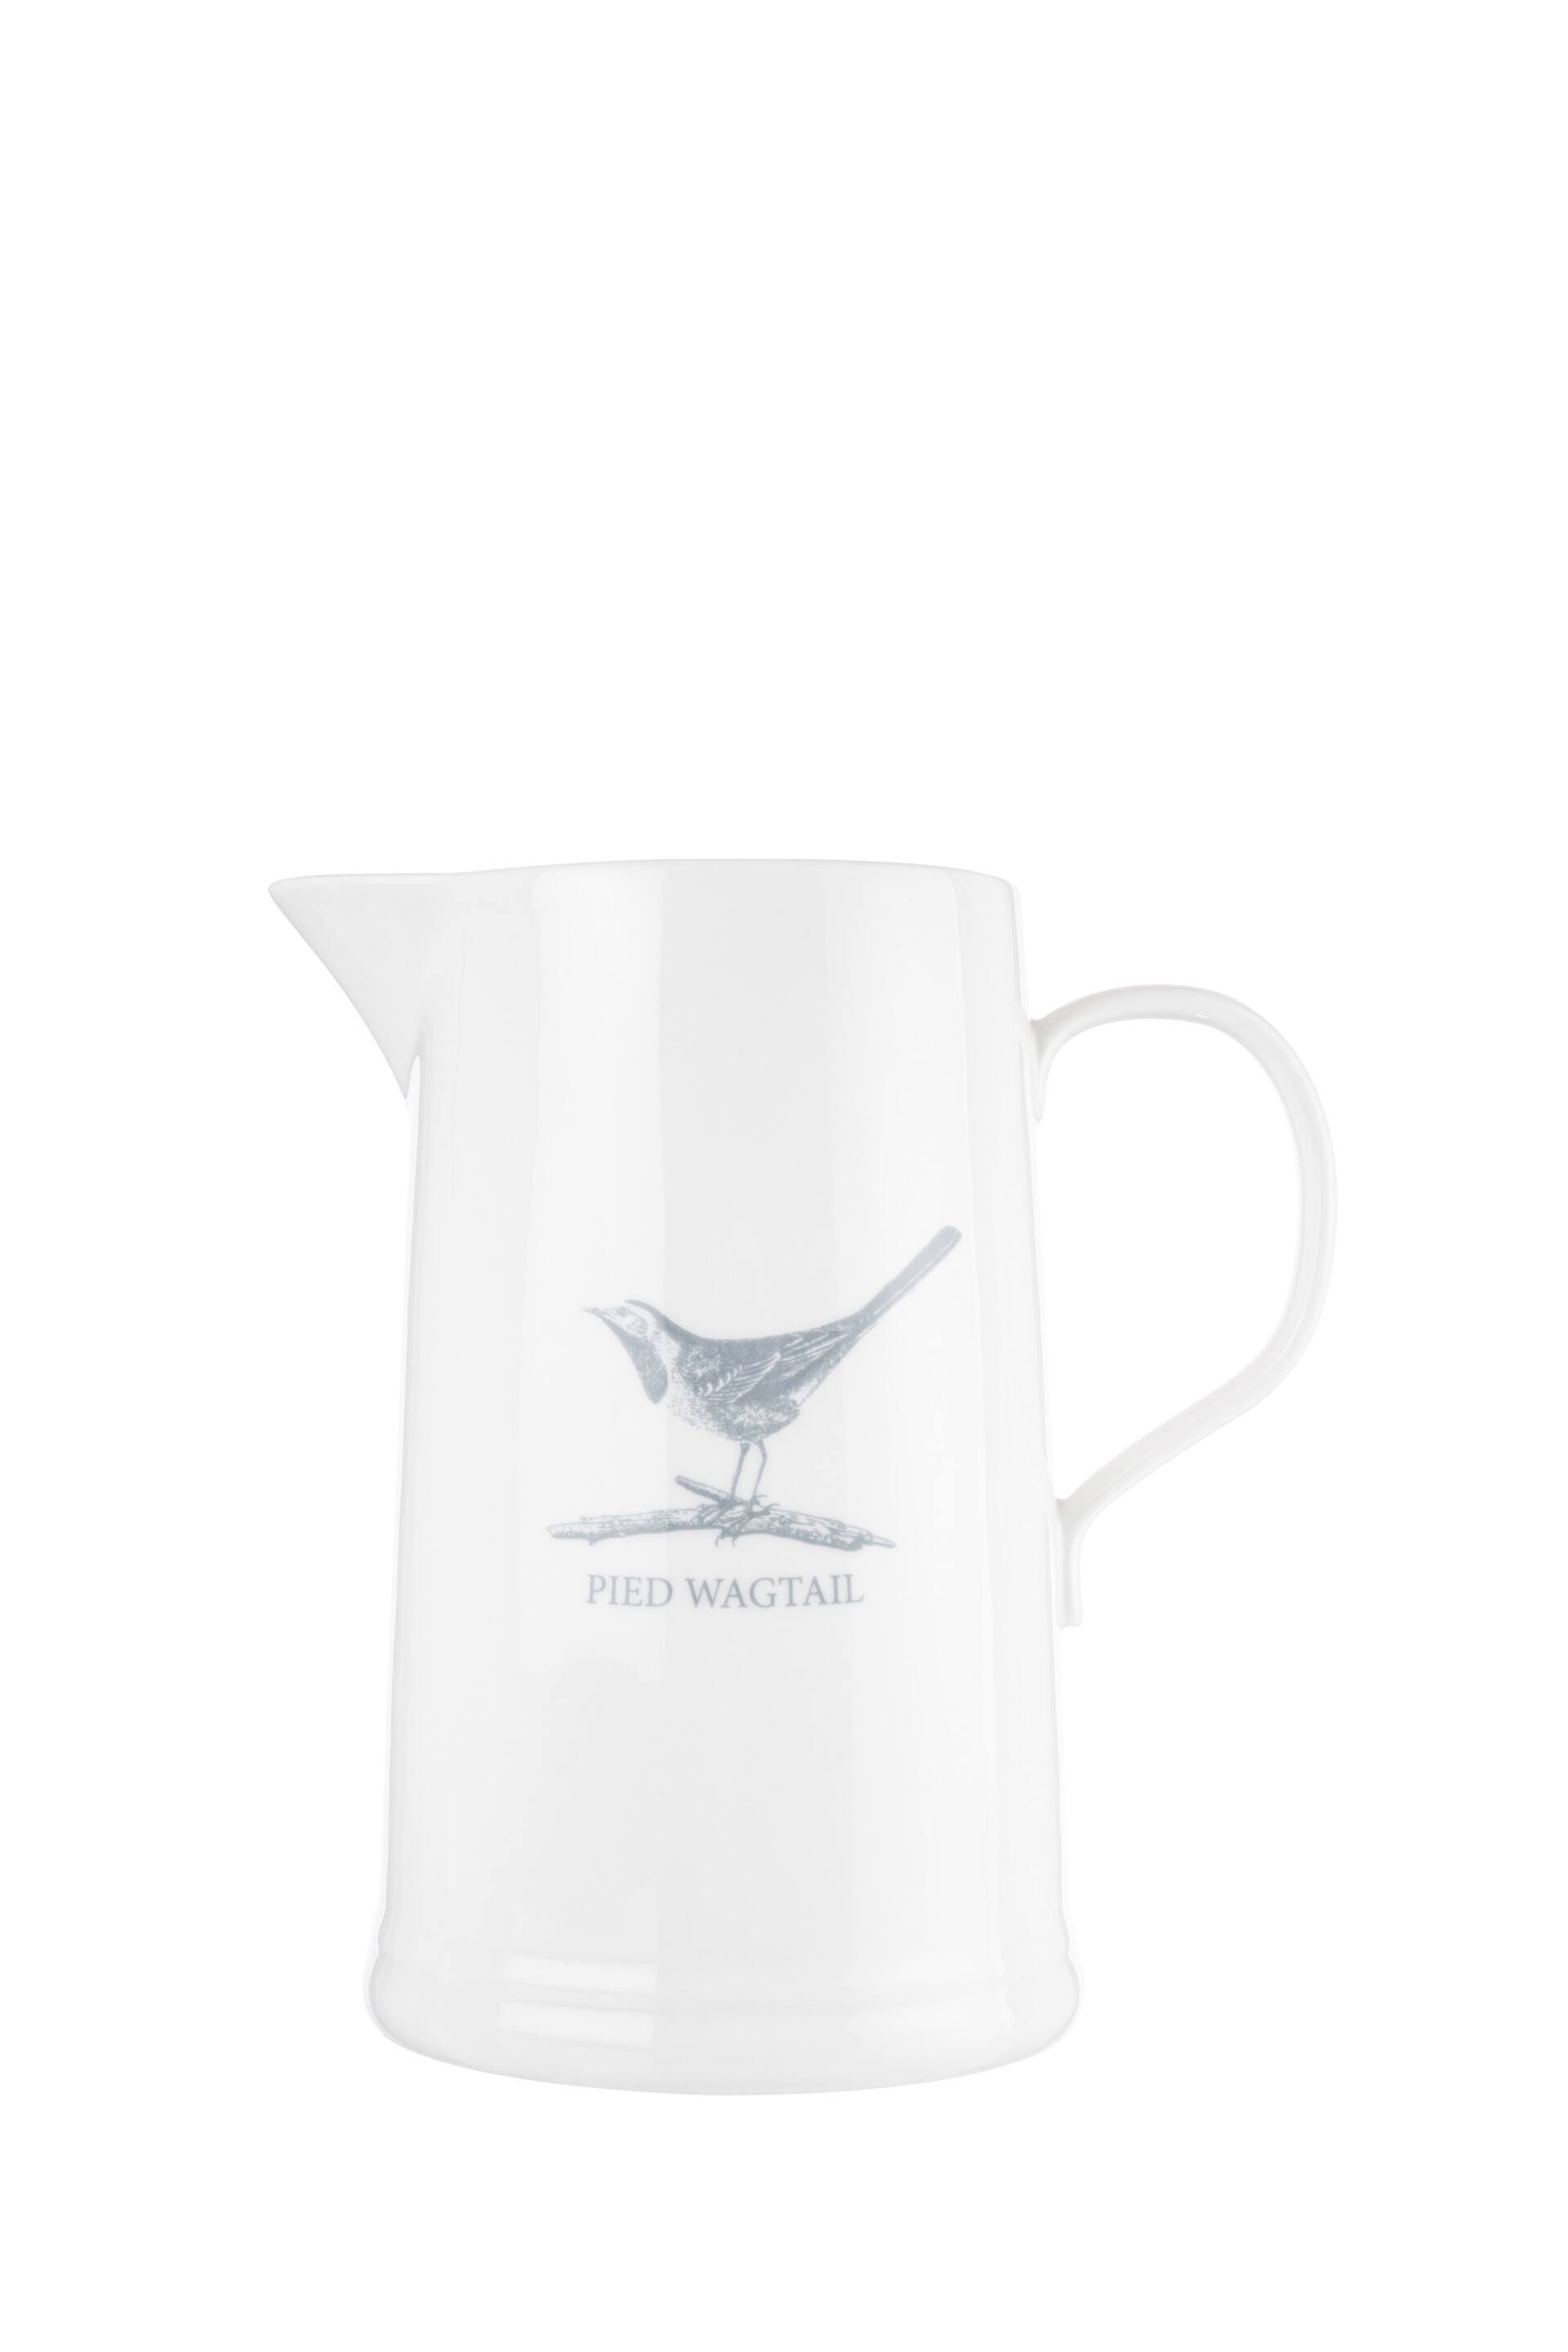 Mary Berry White Garden Pied Wagtail Large Jug - Image 2 of 4